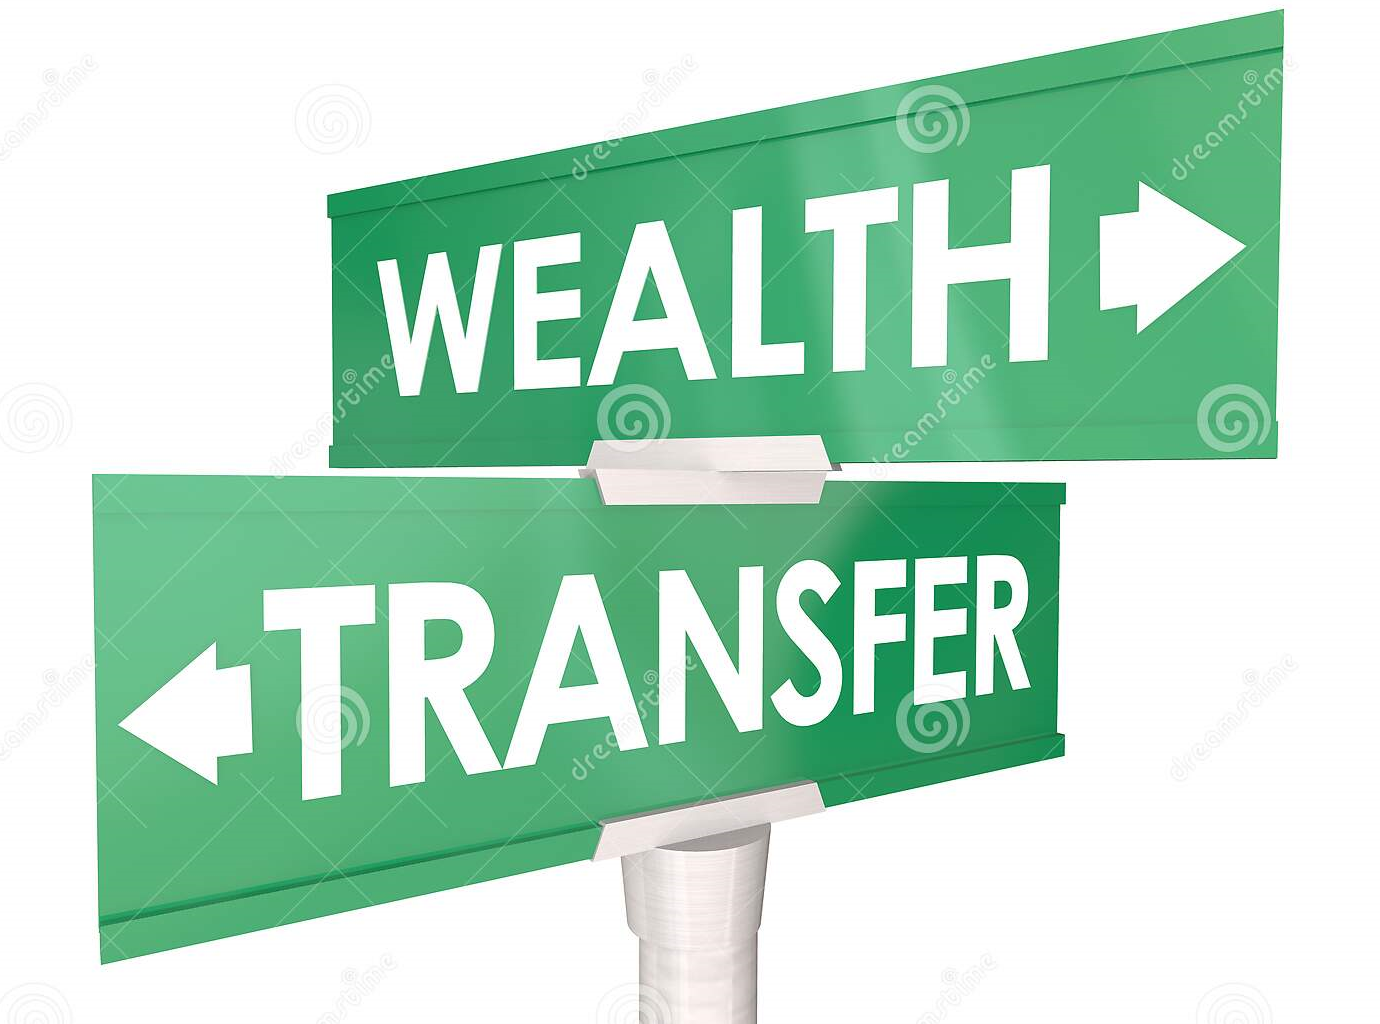 wealth transfer street sign graphic